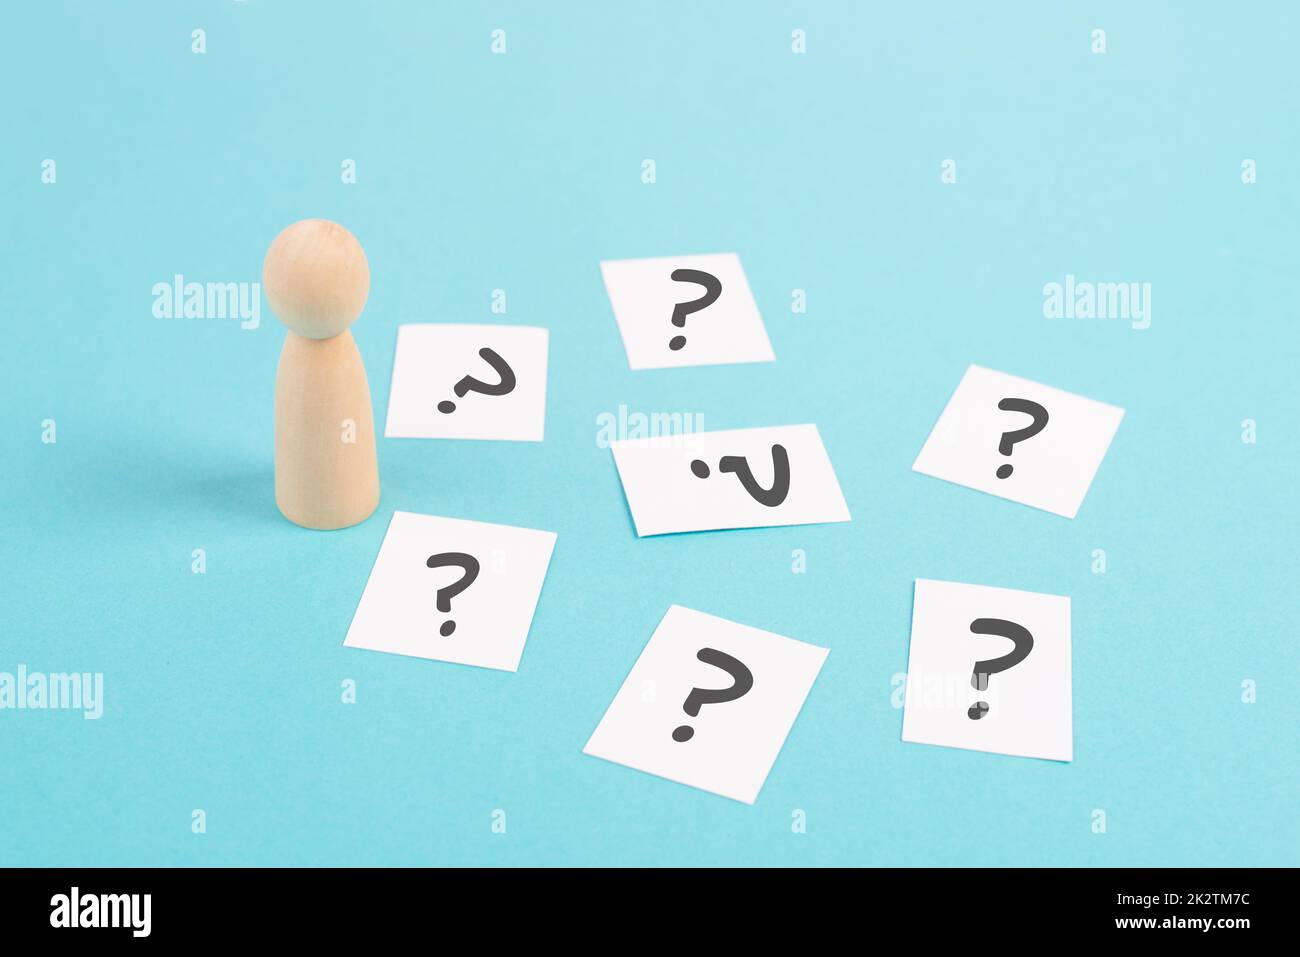 Man is thinking, question marks, brainstorming and looking for answers, solving a problem, making a decision, business and education concept Stock Photo